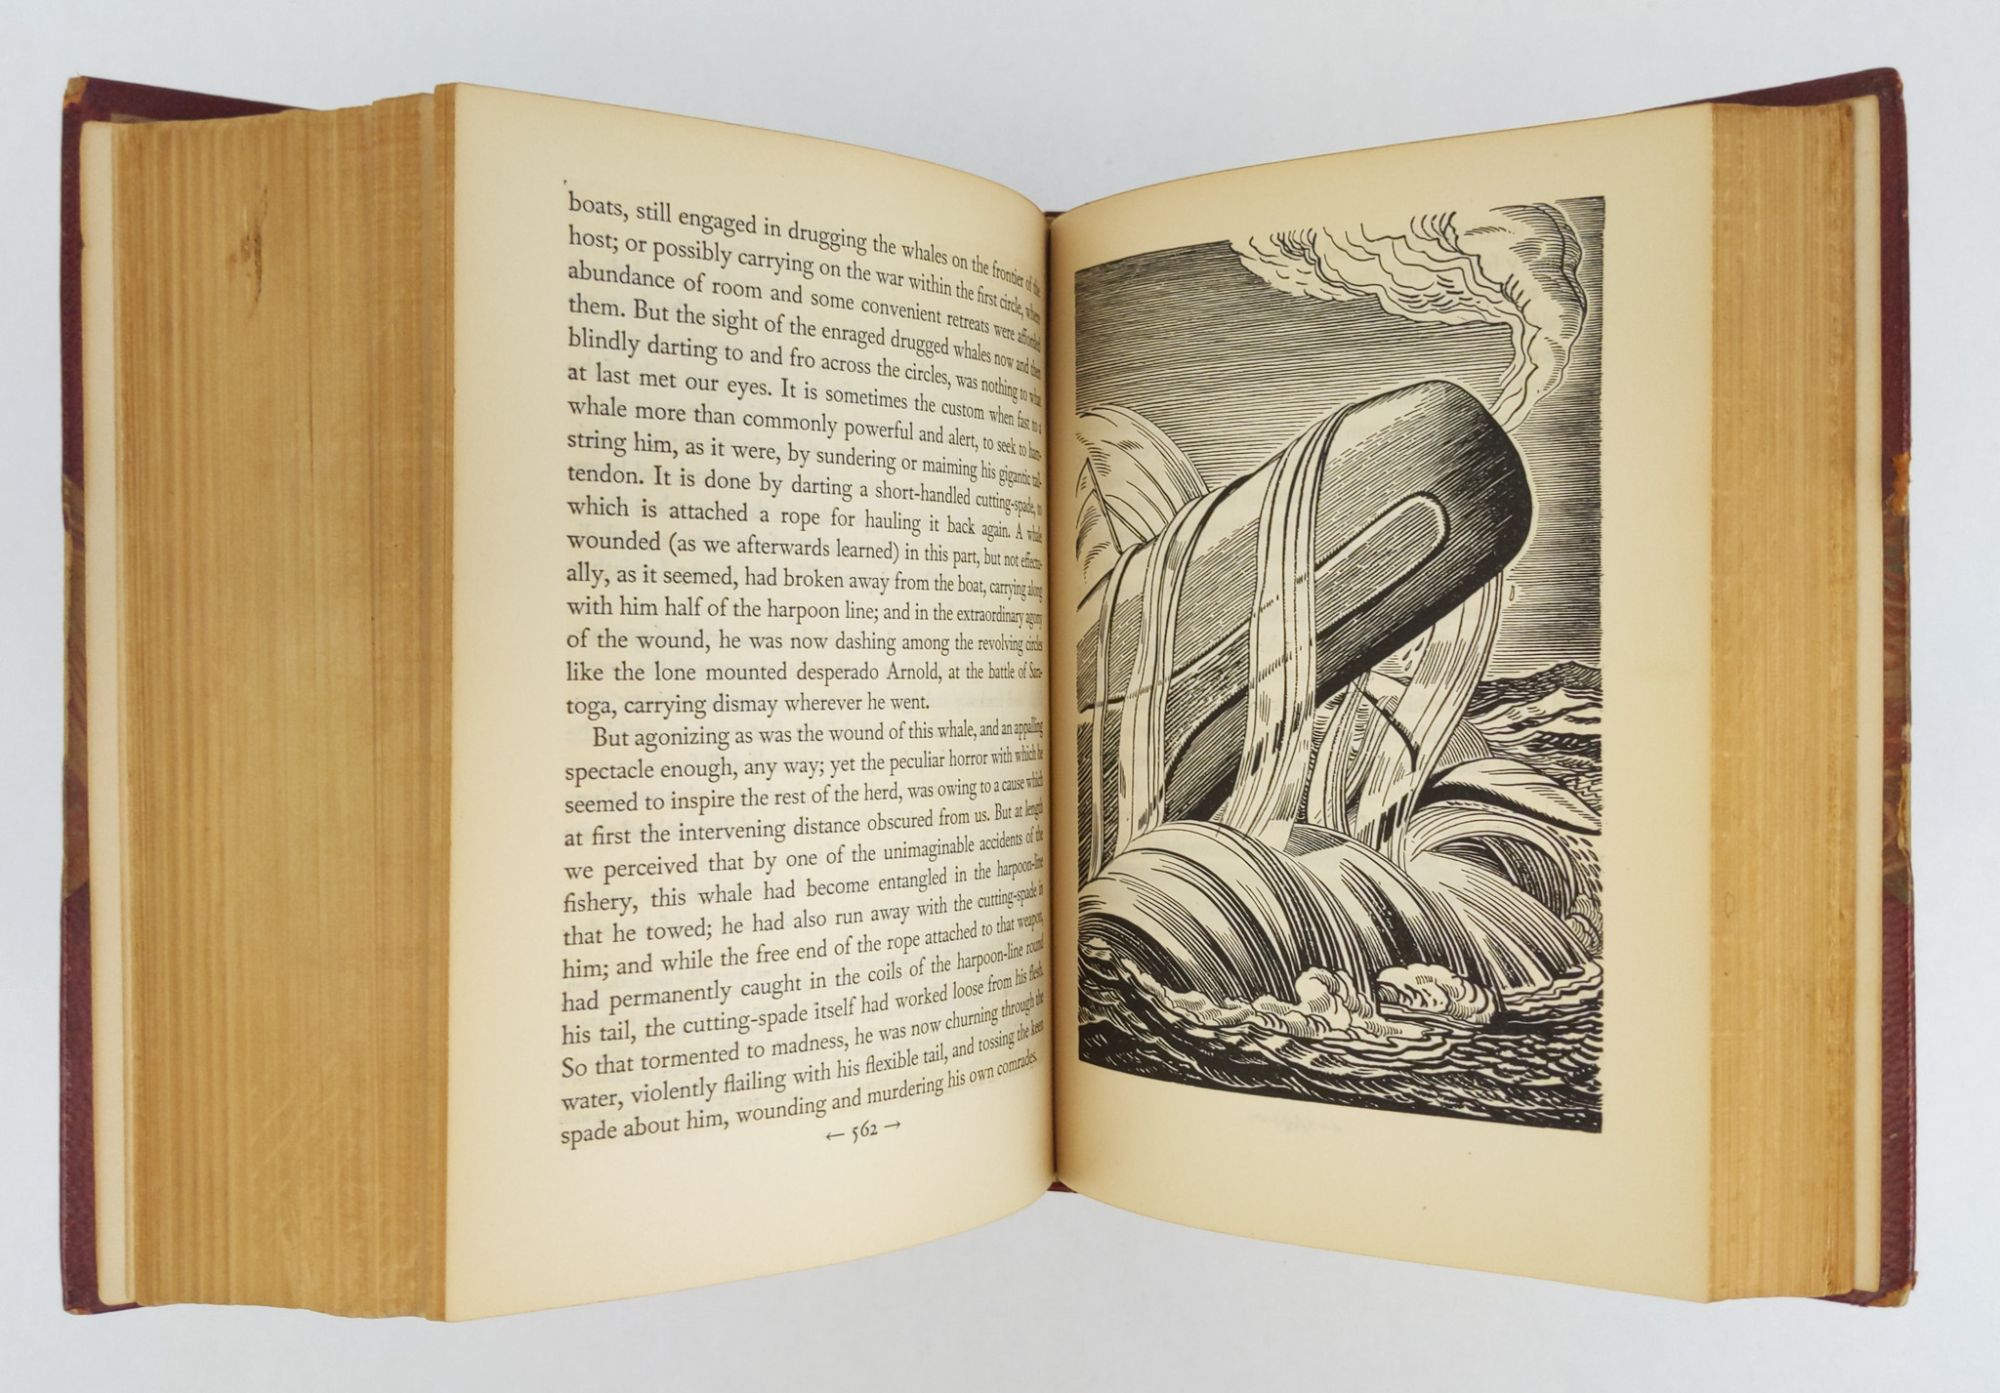 Product Image for MOBY DICK, OR THE WHALE